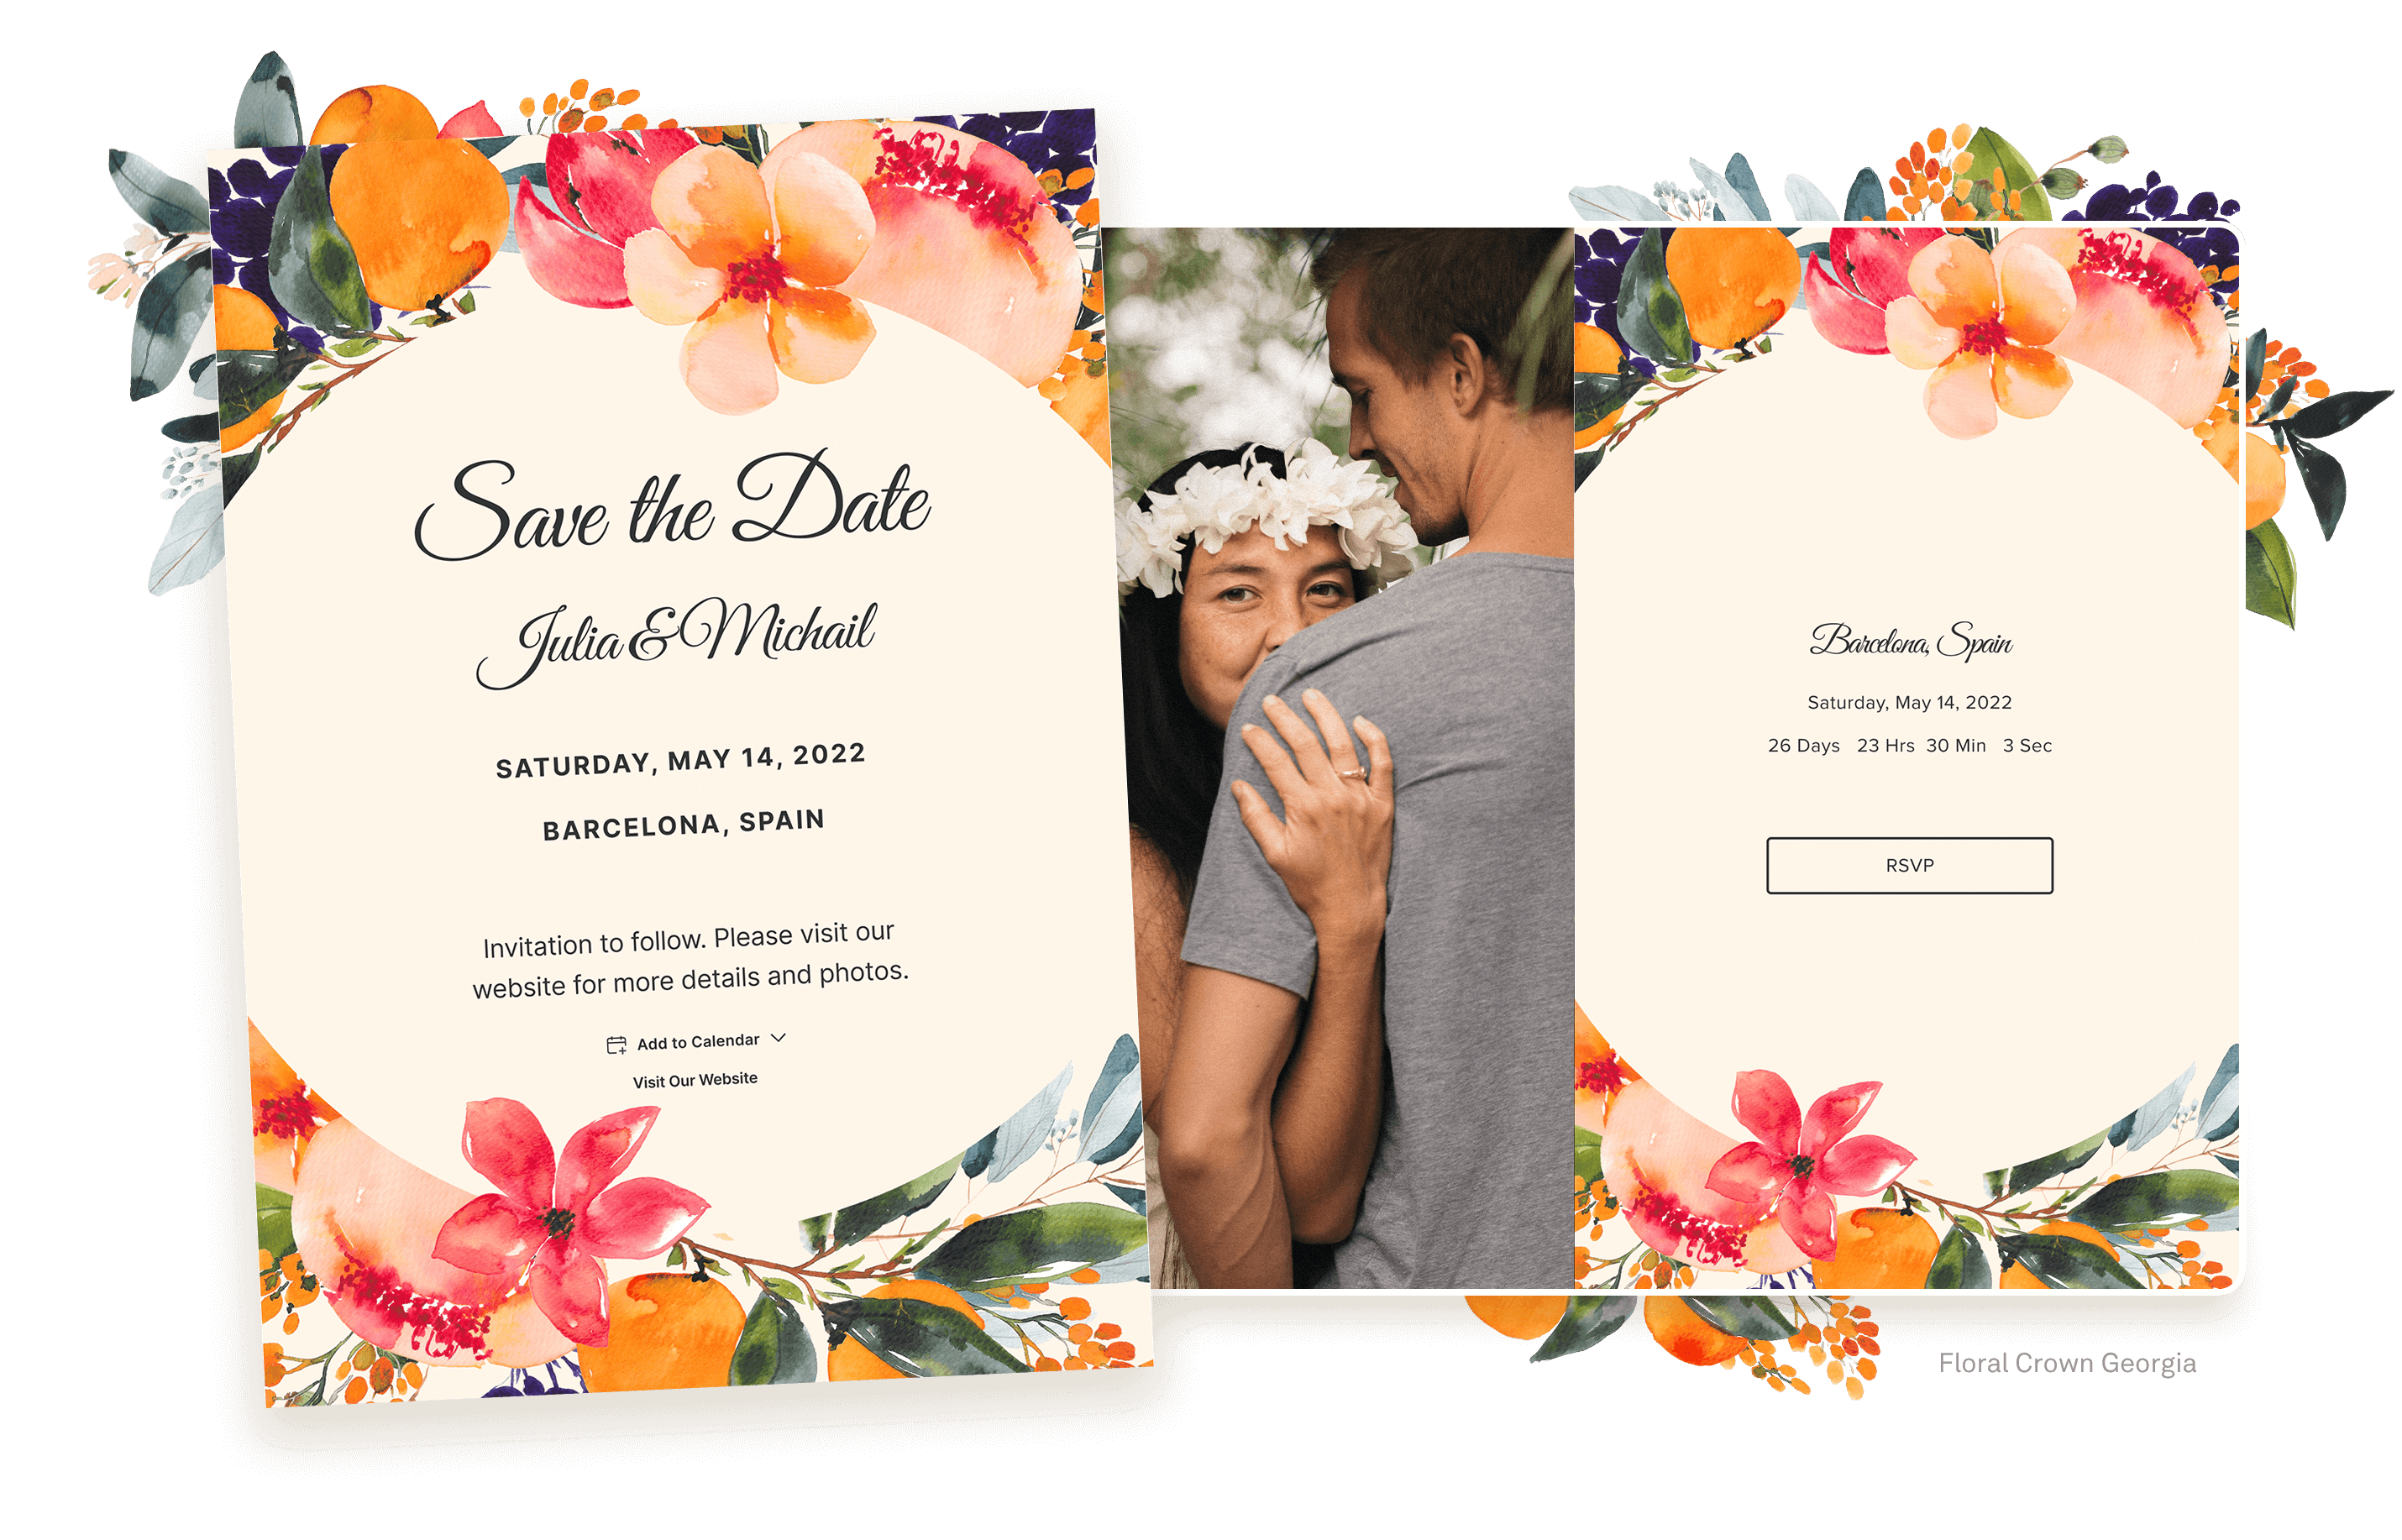 Clear Wedding Save The Date Cards